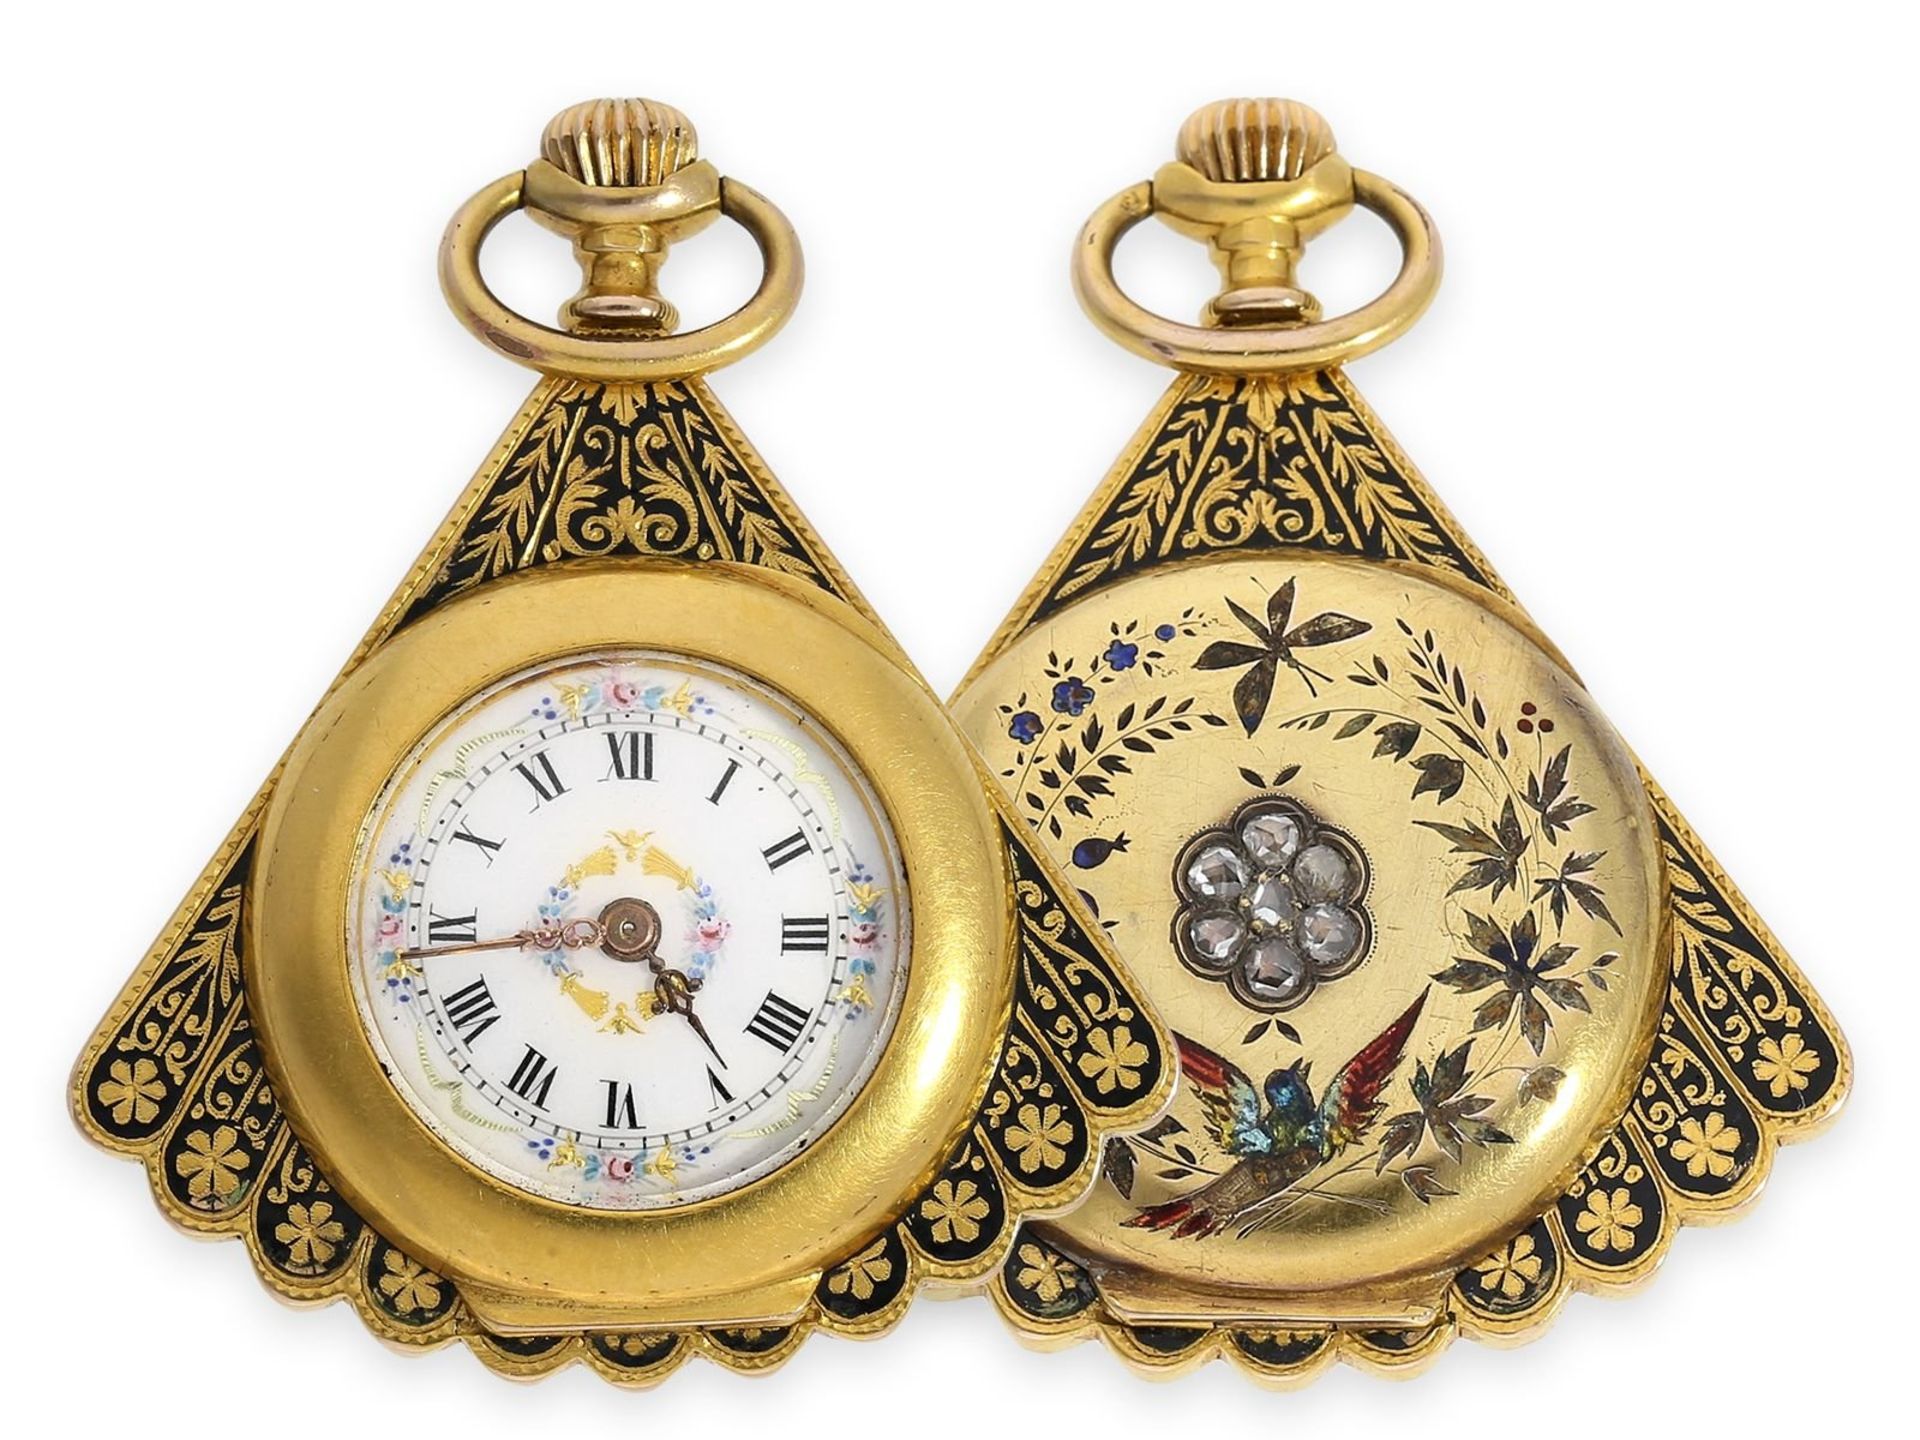 Pendant watch/ form watch: extremely attractive and very rare gold/ enamel form watch with diamond